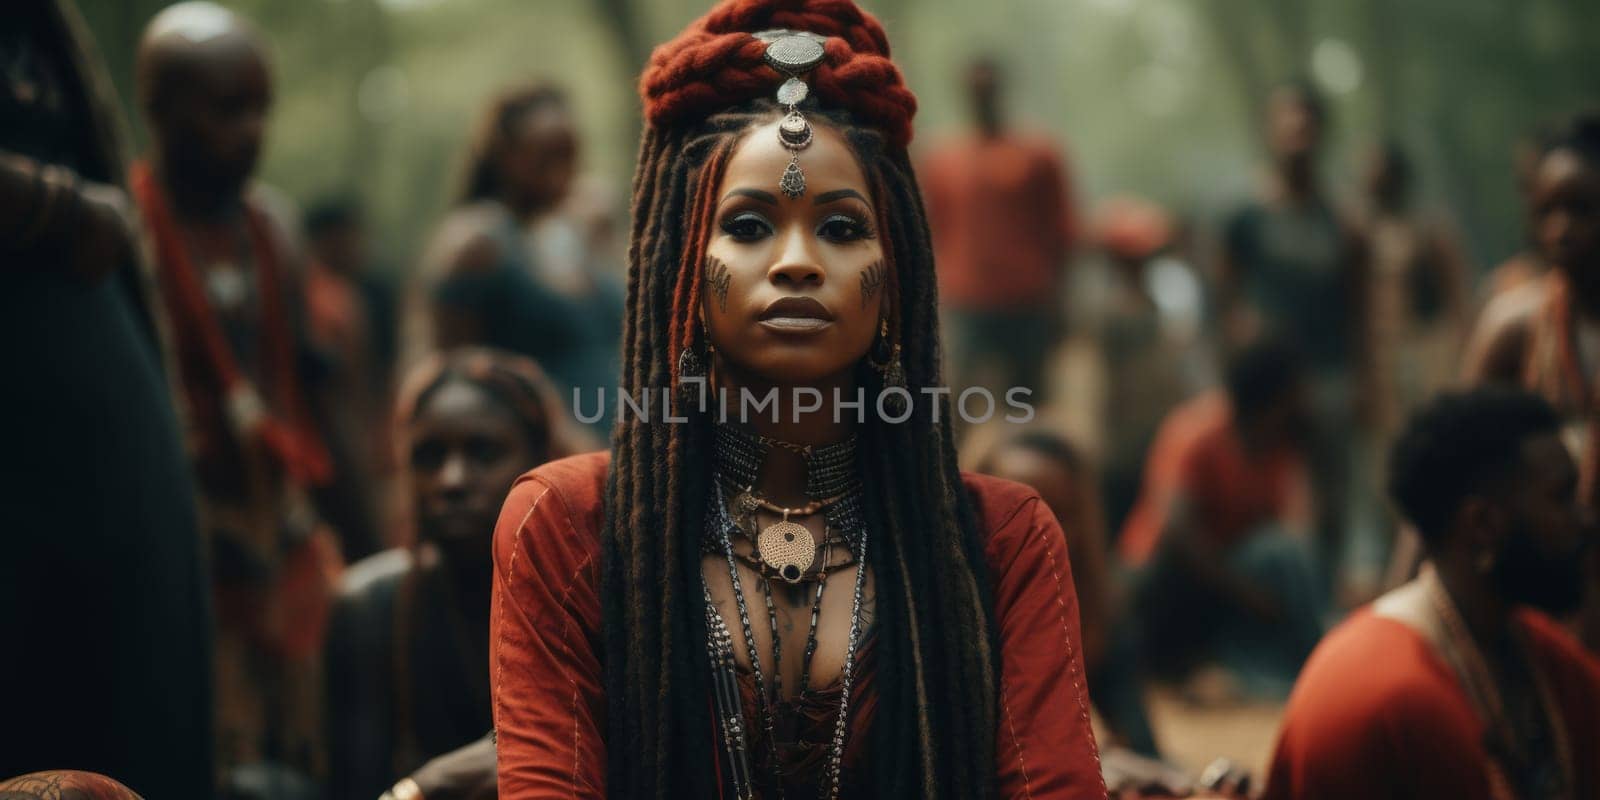 A woman with dreadlocks and a red dress sitting in front of other people